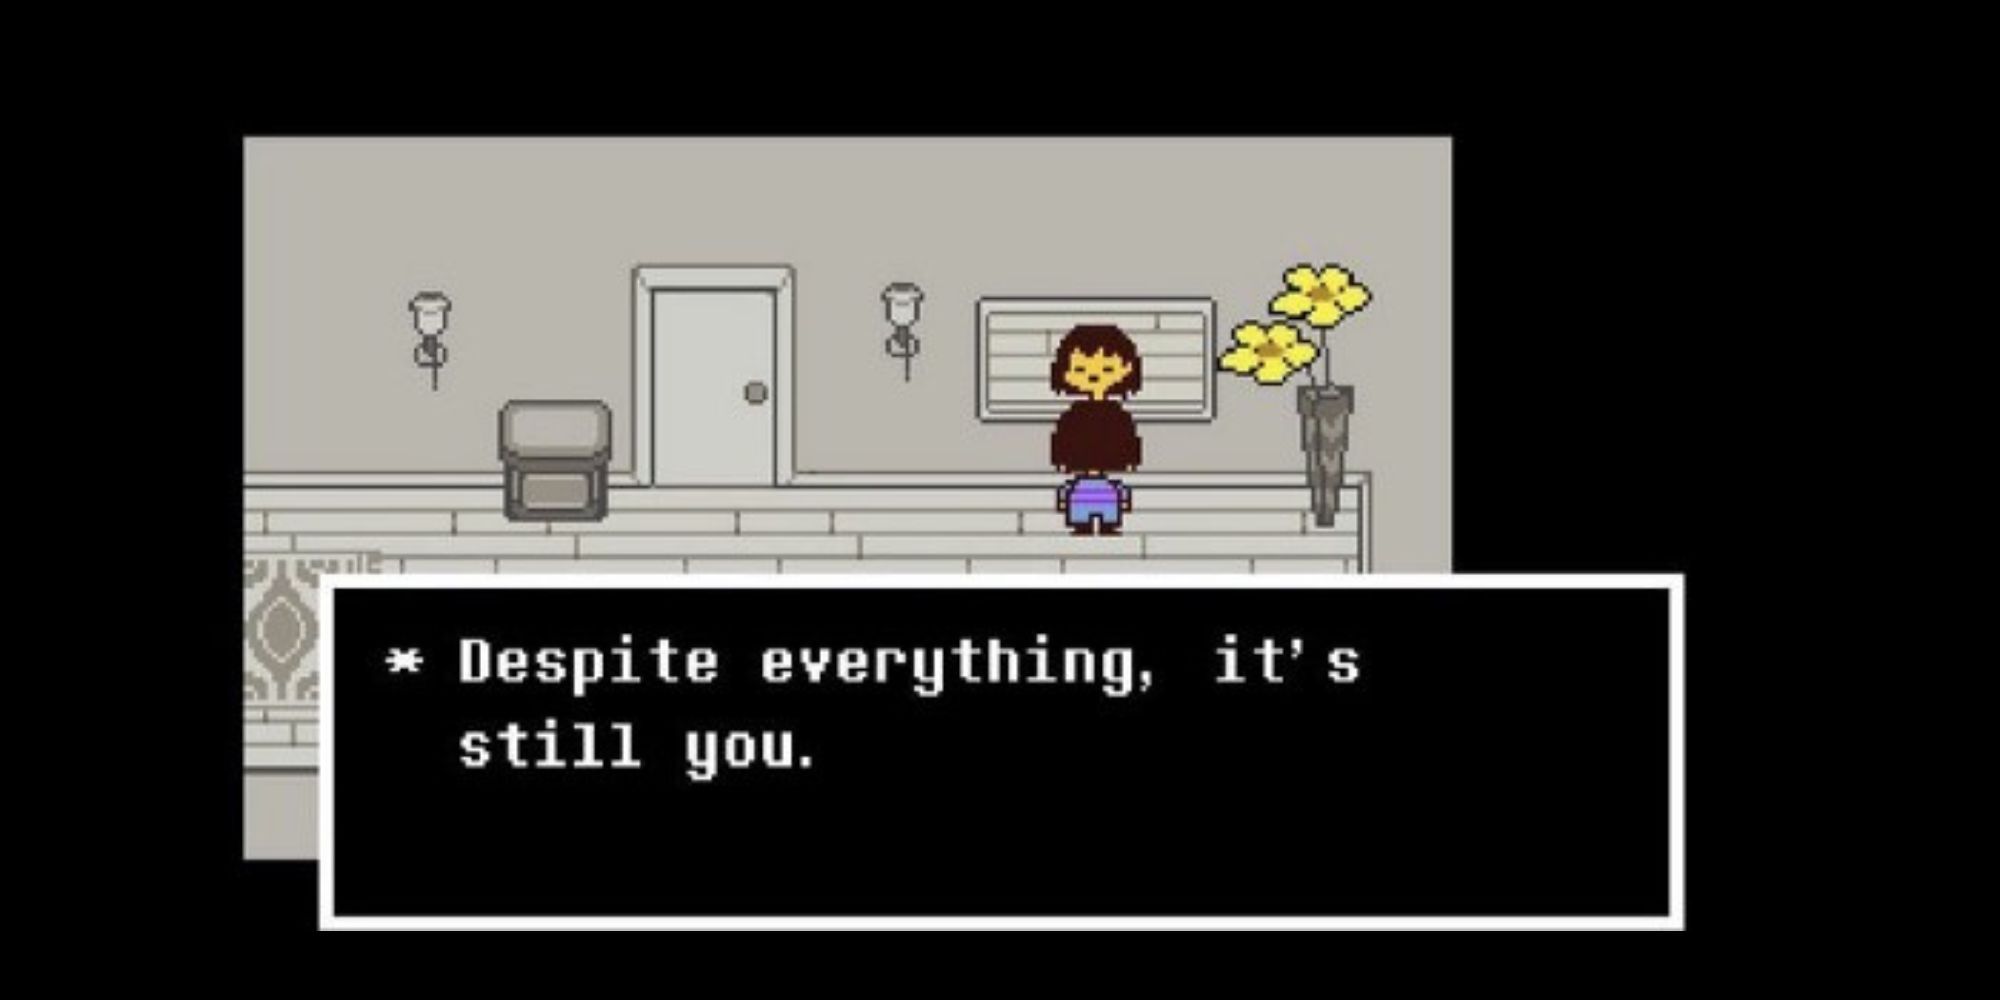 Frisk looks at their reflection in the mirror, noting that they're still the same after everything